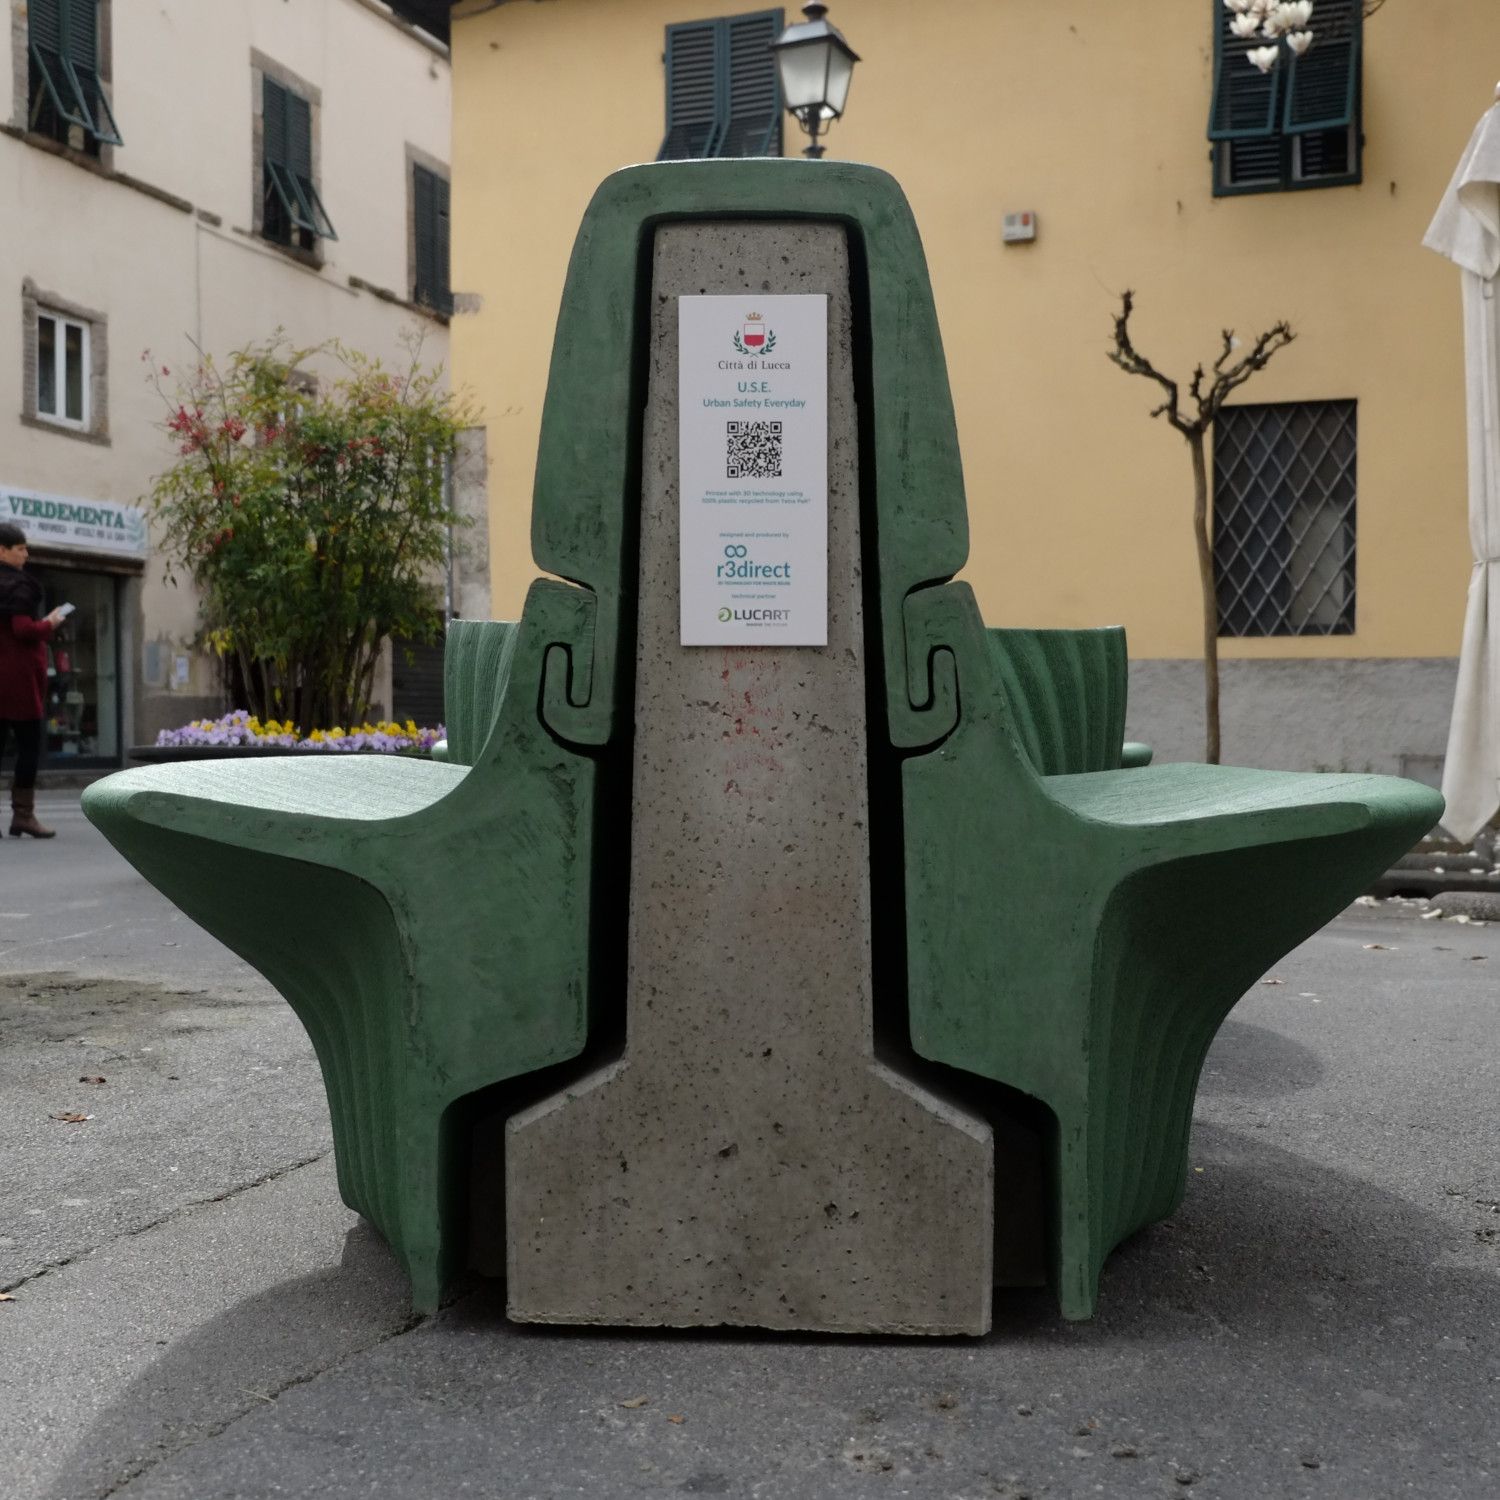 Public furniture printed in 3D with recycled plastic installed in the Italian city of Lucca.